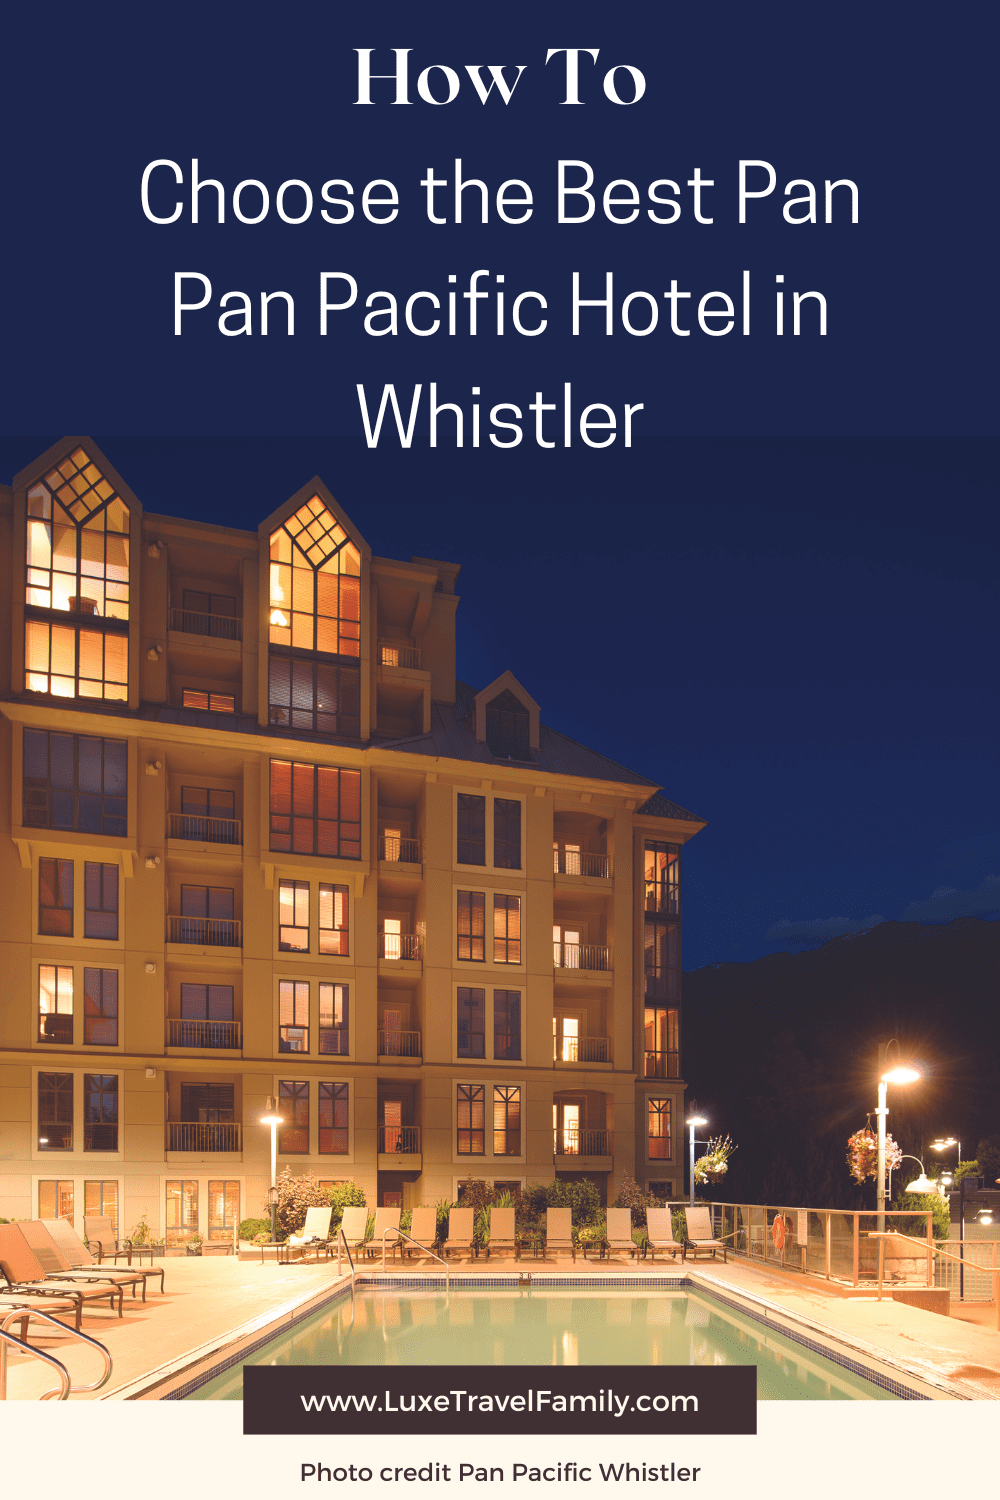 How to Choose the Best Pan Pacific Hotel in Whistler